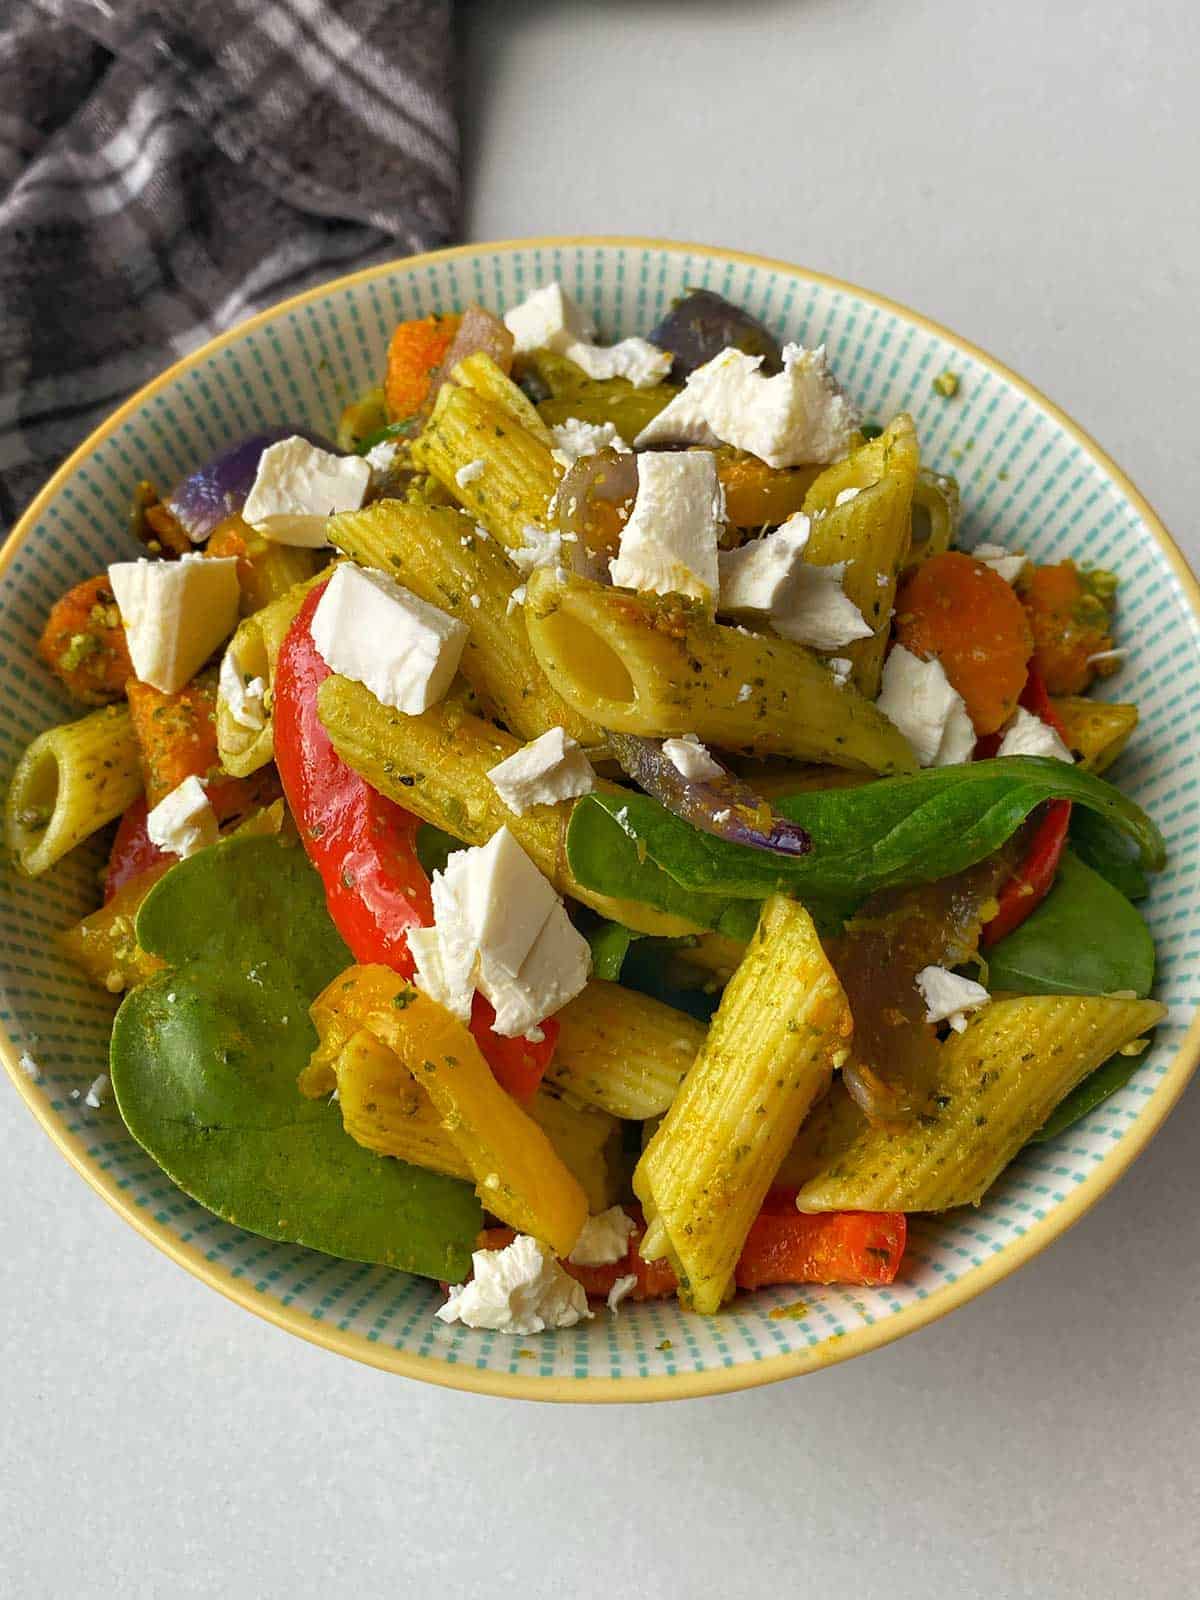 A close up of roasted vegetable and pesto pasta salad in a small bowl.